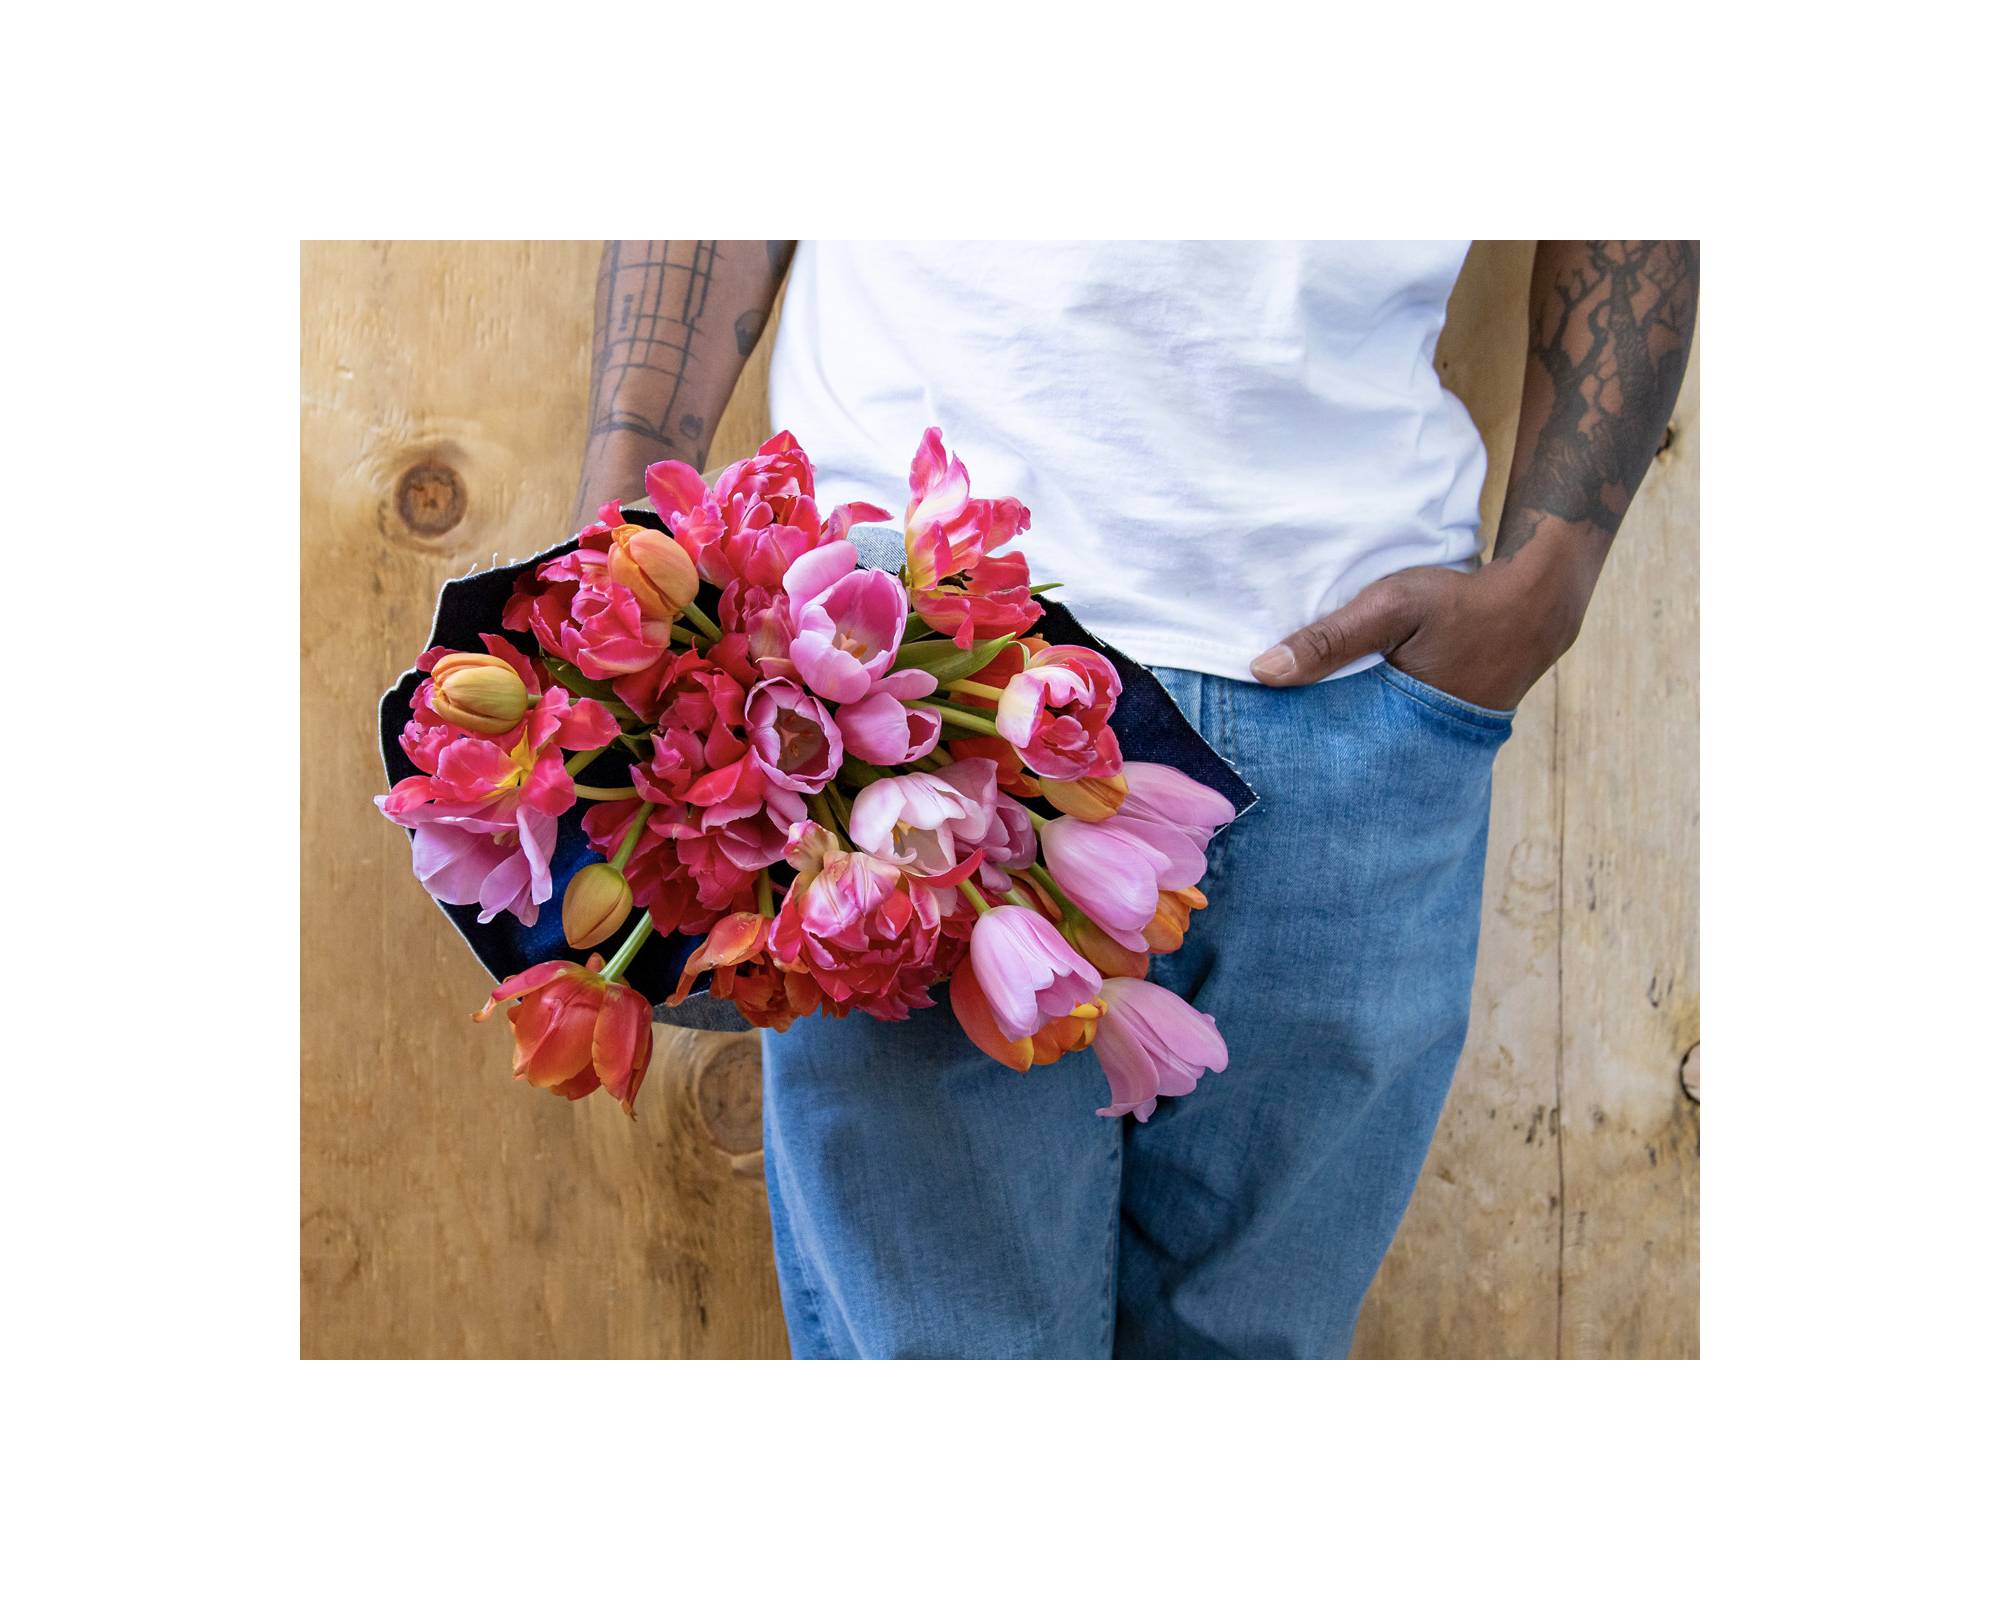 Someone holding a bouquet of pink roses